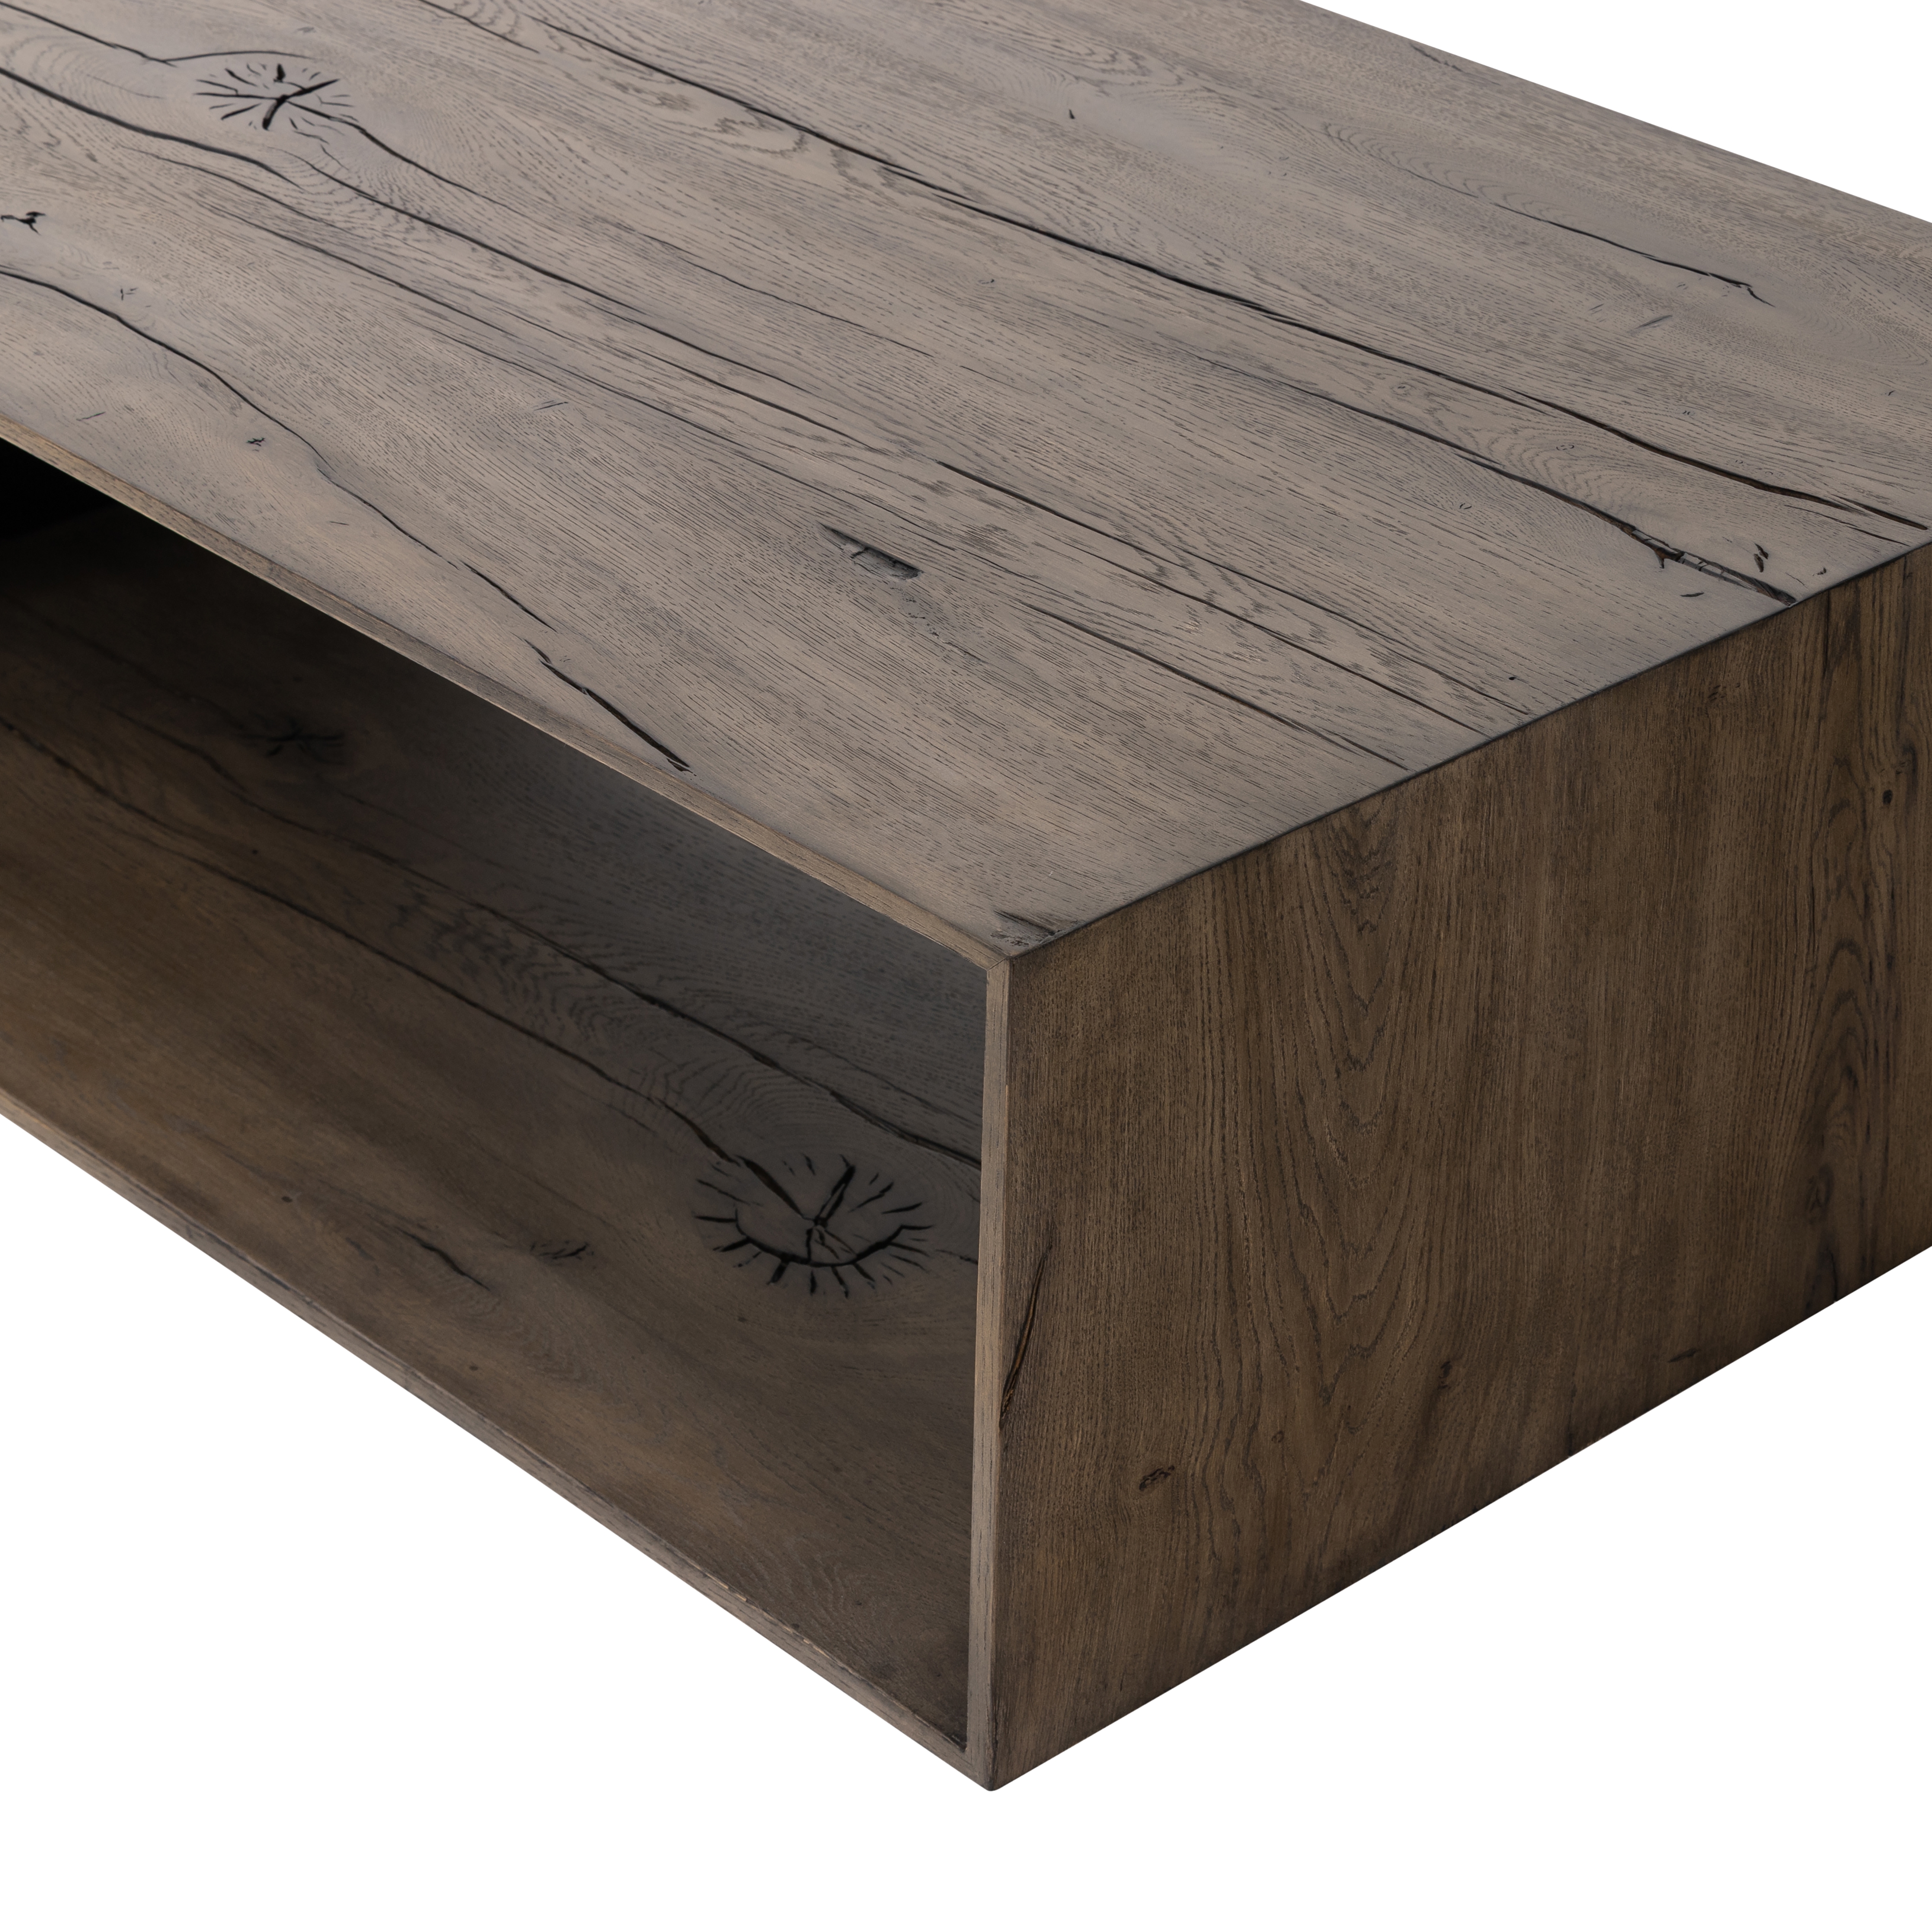 Odell Coffee Table-Grey Rclmd French Oak - Image 2